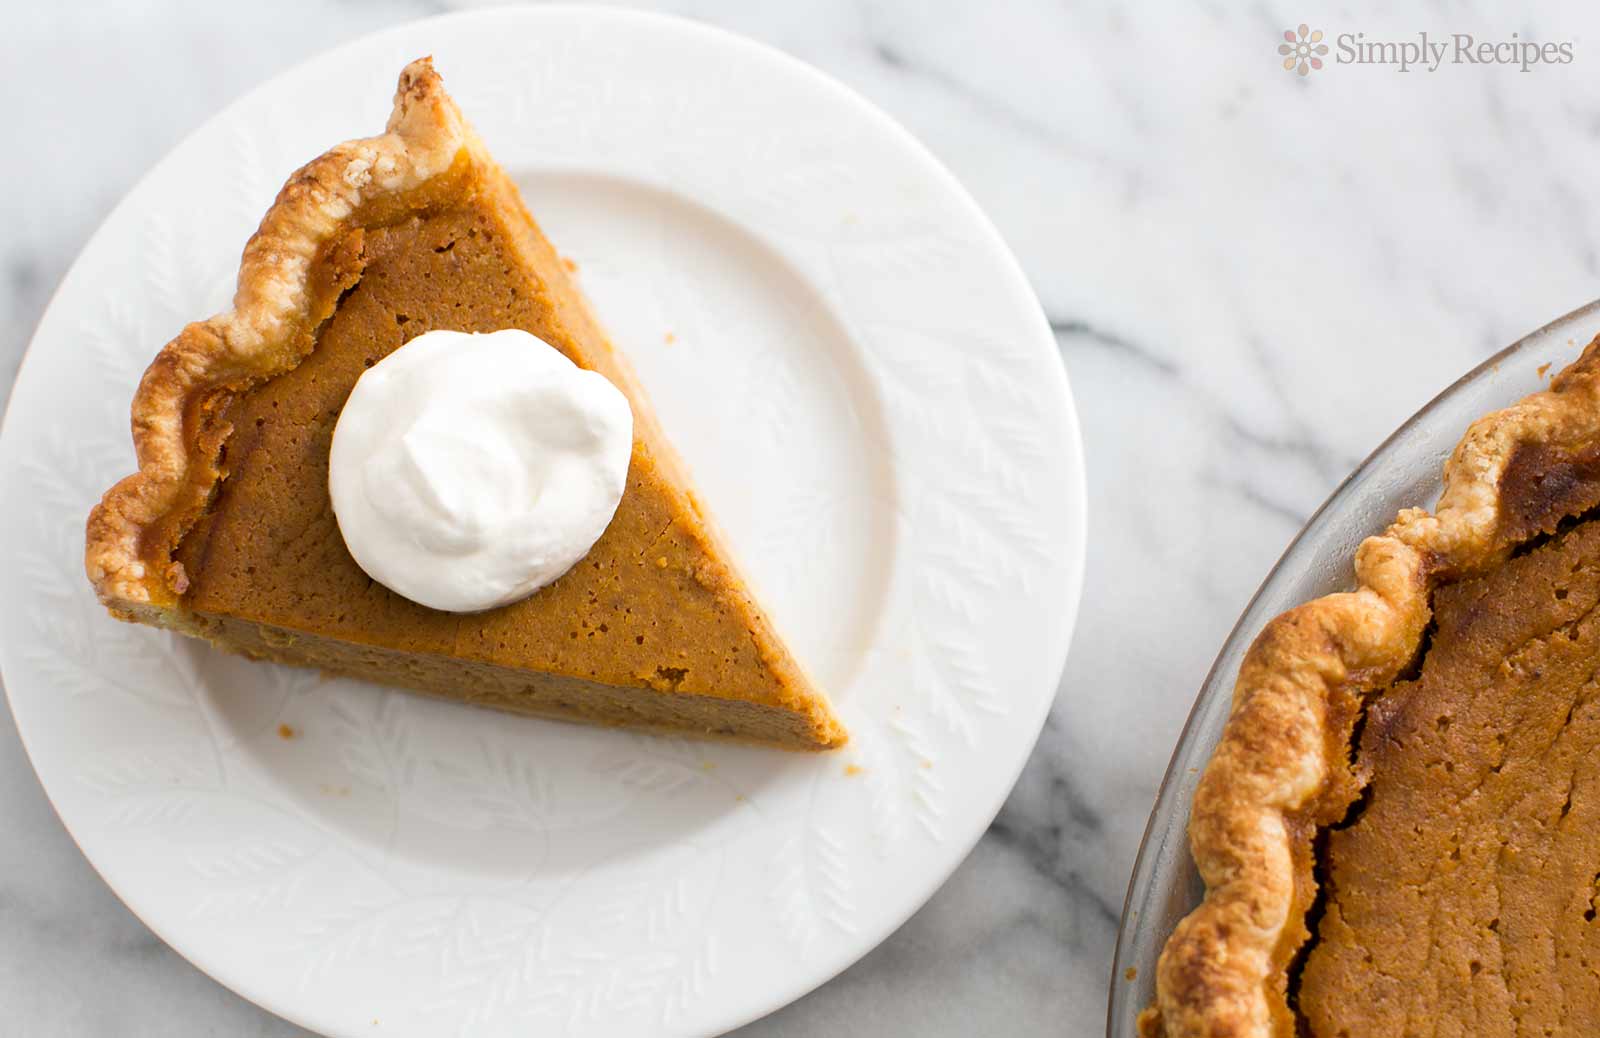 10 Delicious Pie Recipes To Master For The Holidays
